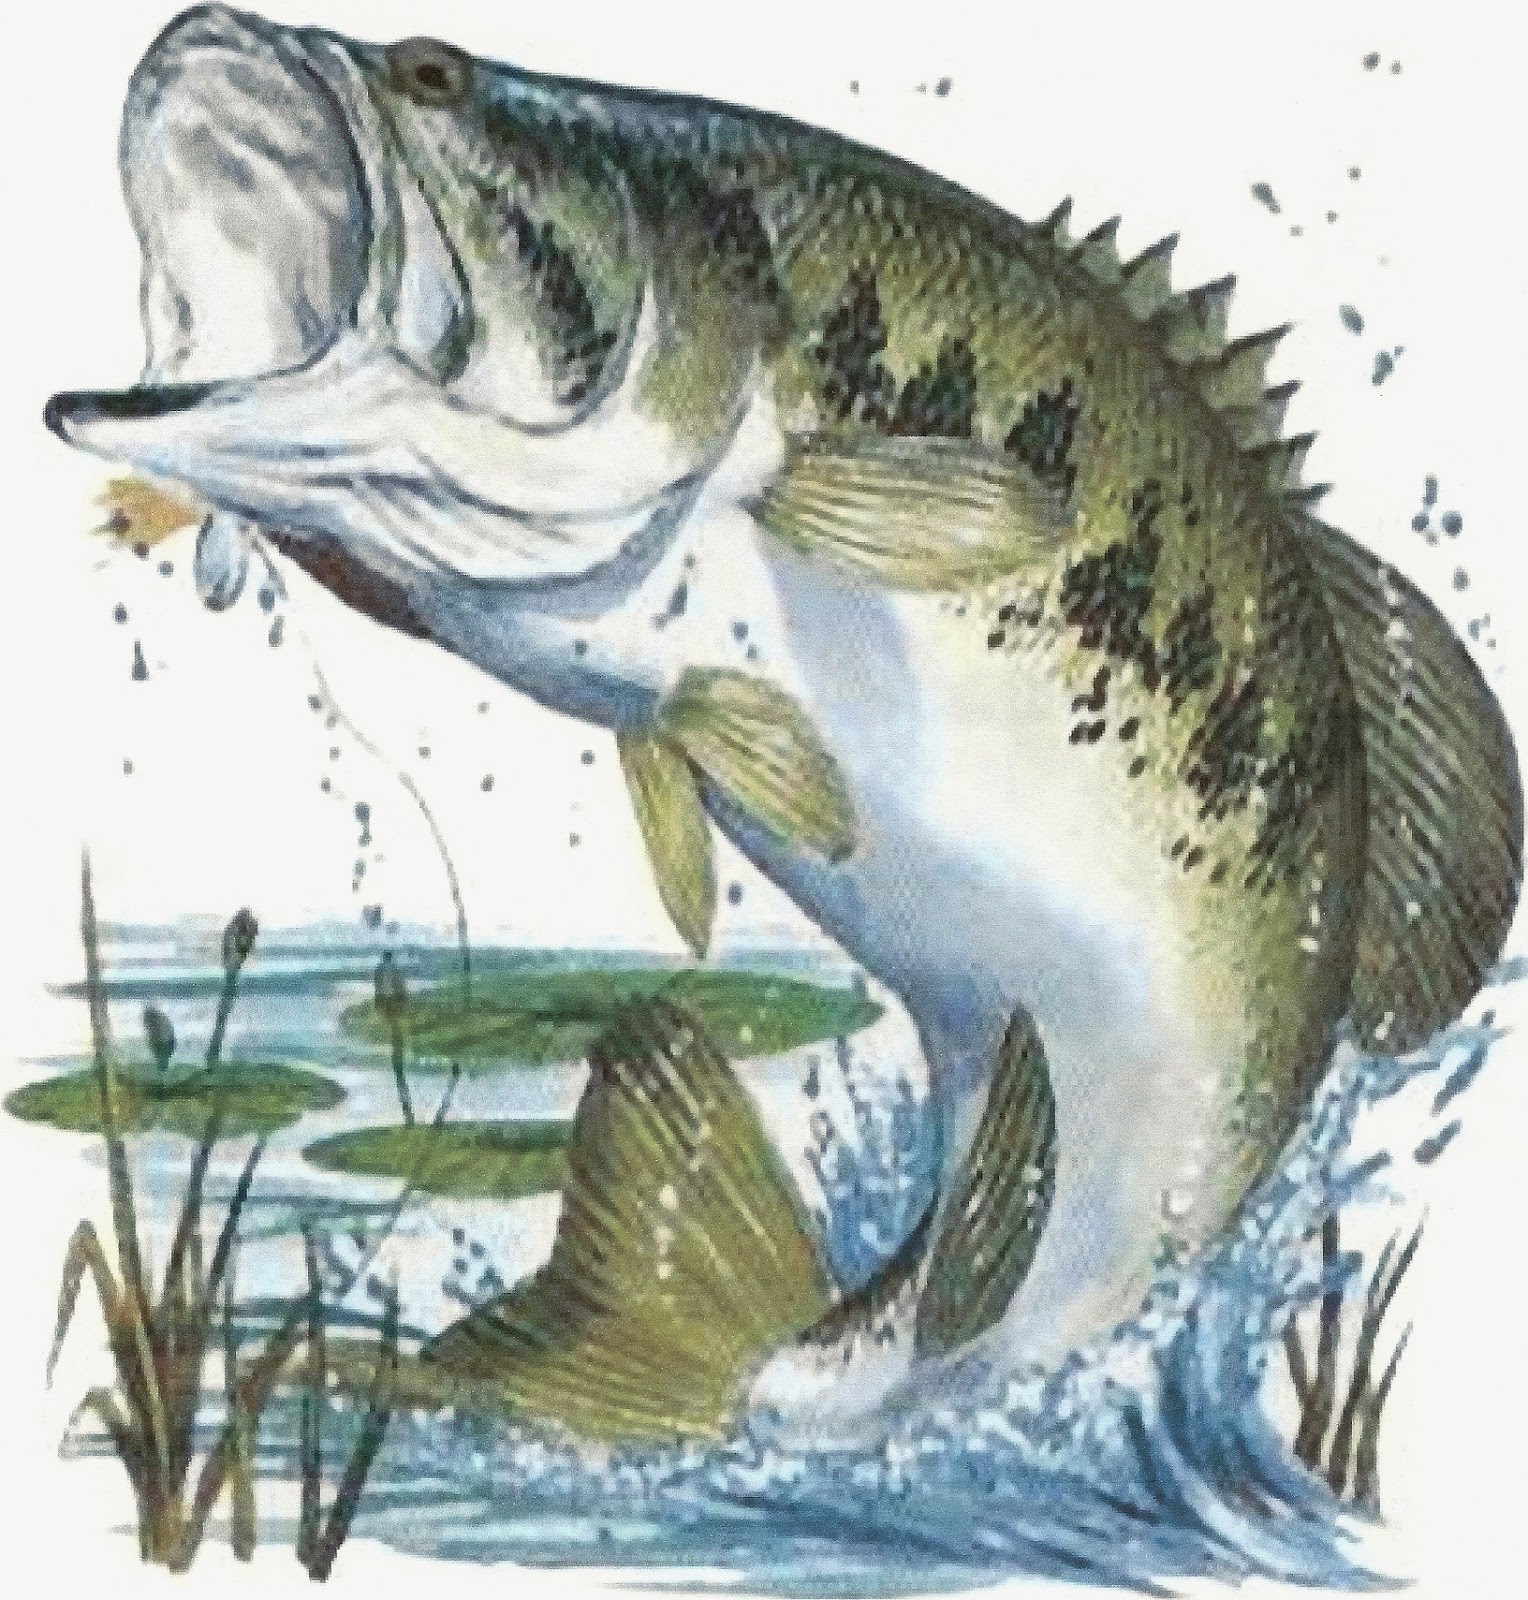 Bass clipart spotted bass. Fishing drawing at getdrawings